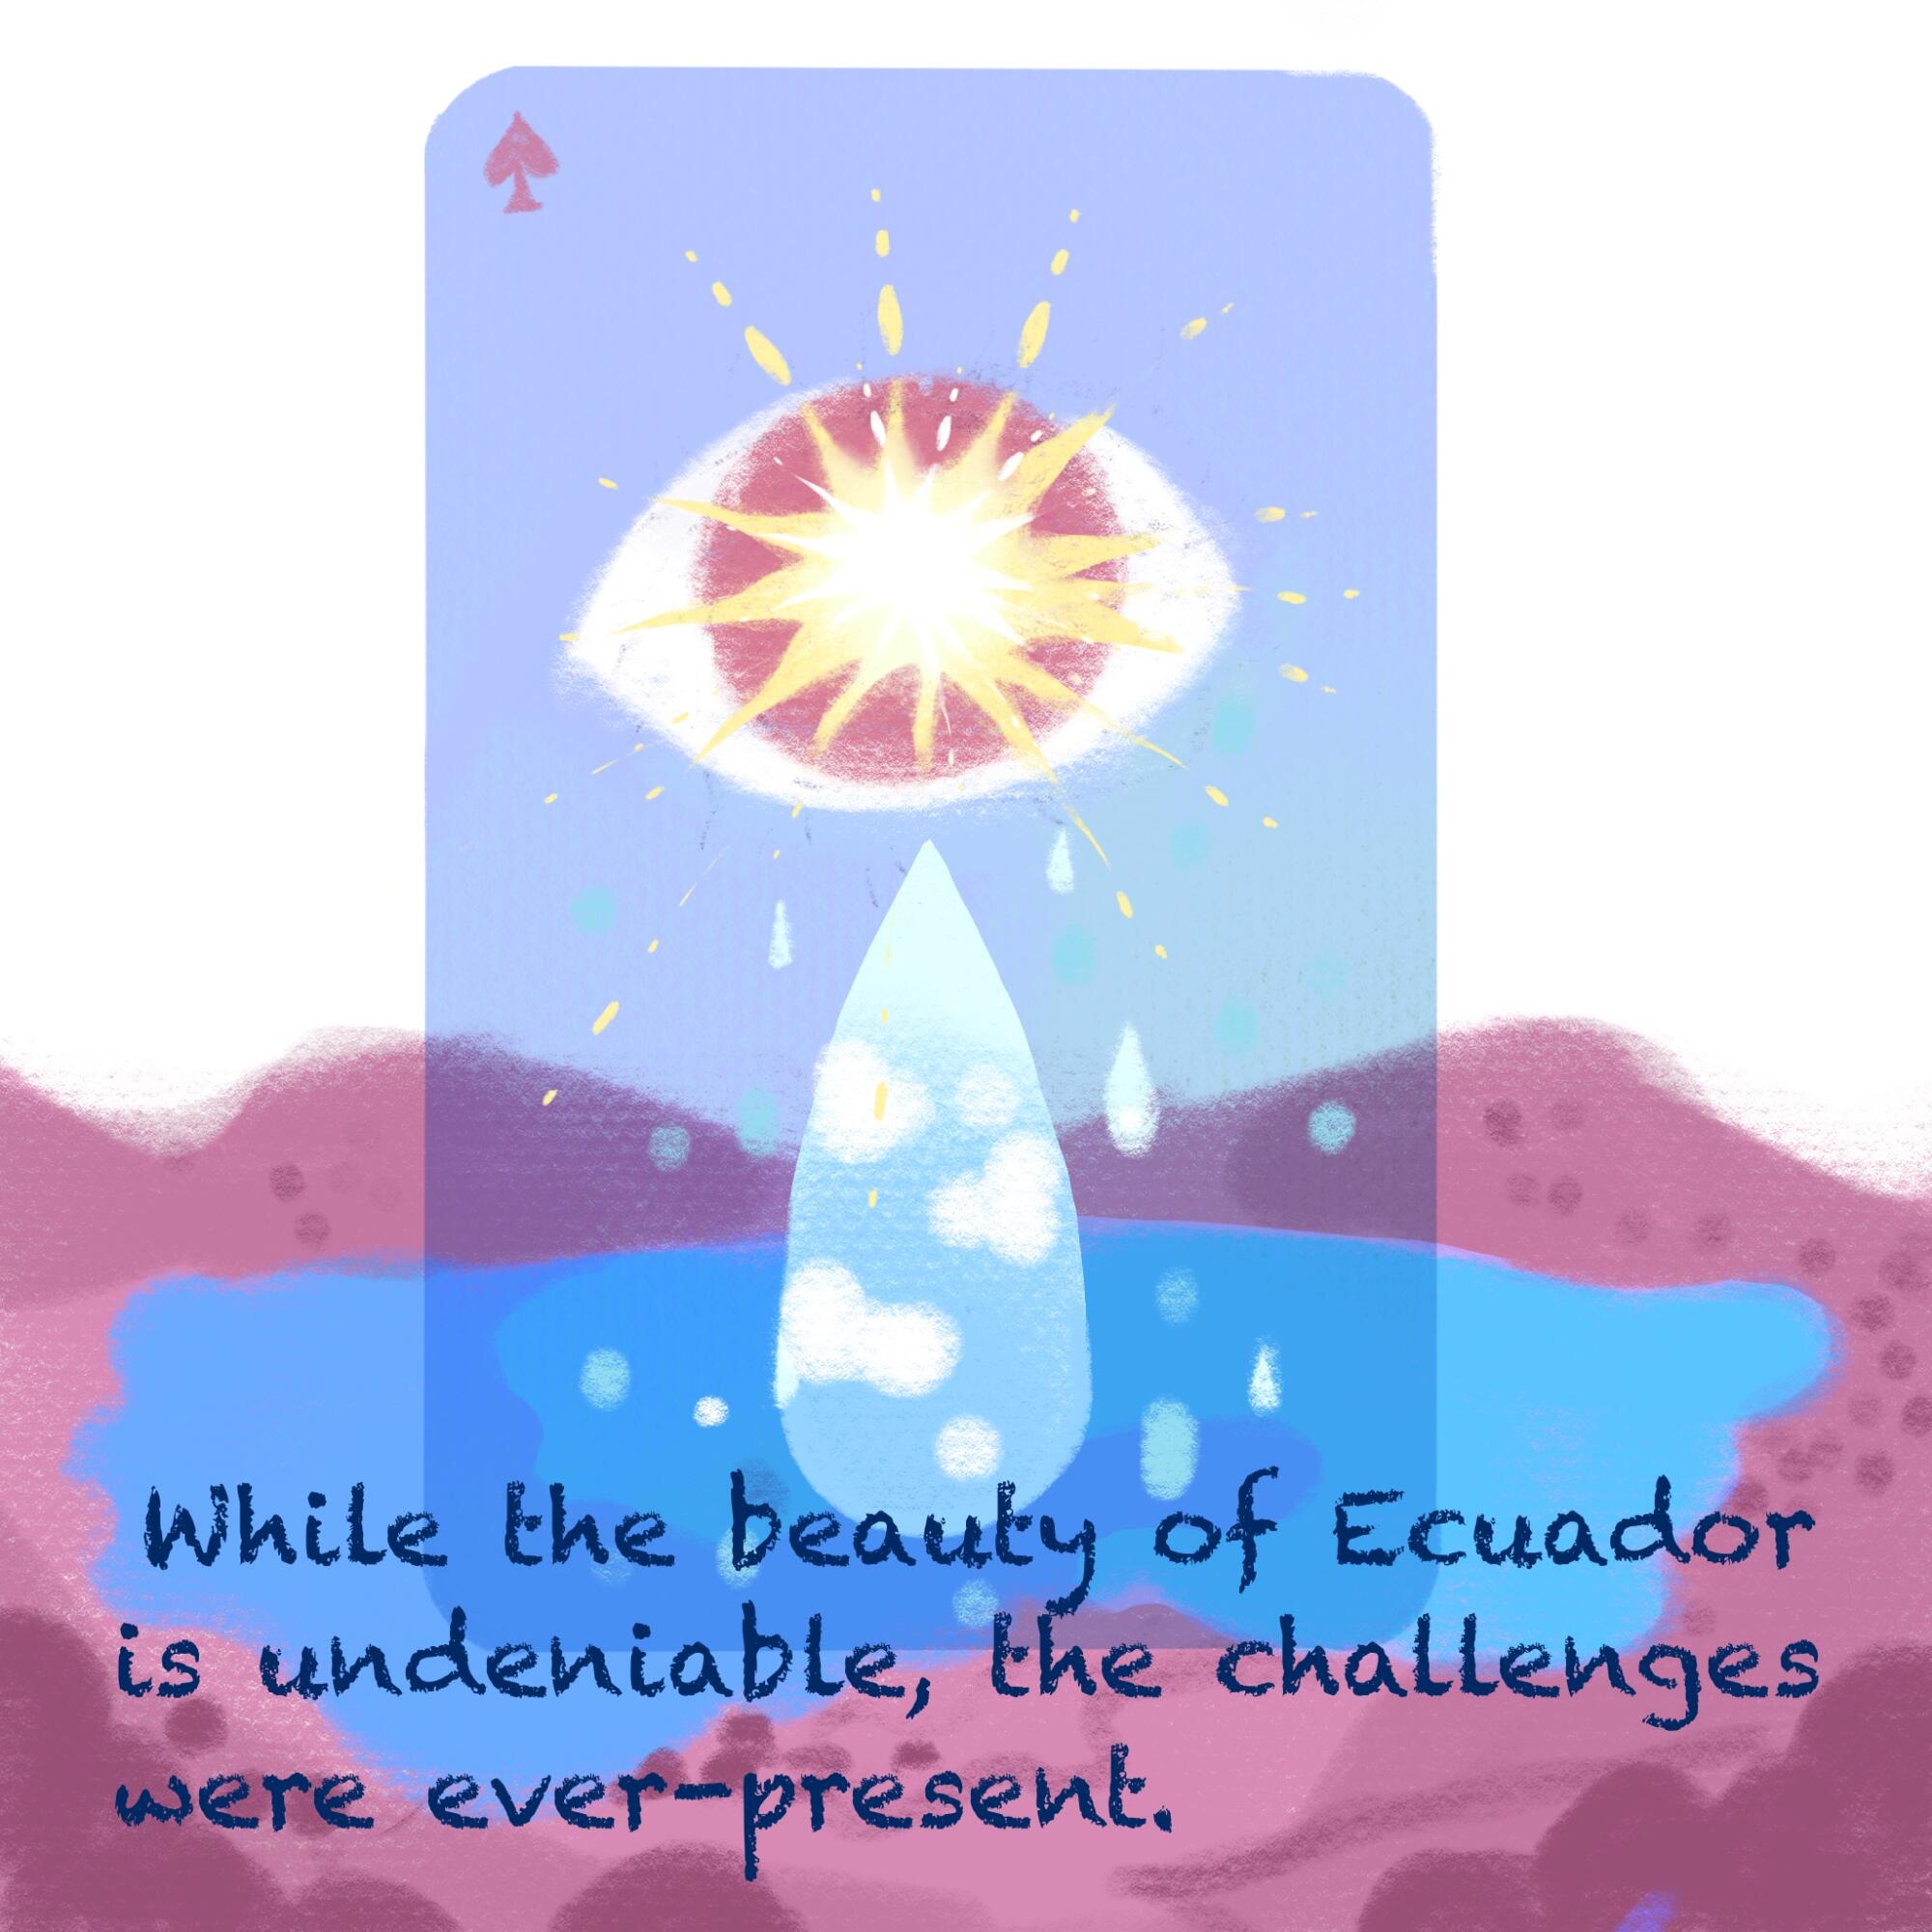 While the beauty of Ecuador is undeniable, the challenges were ever-present 